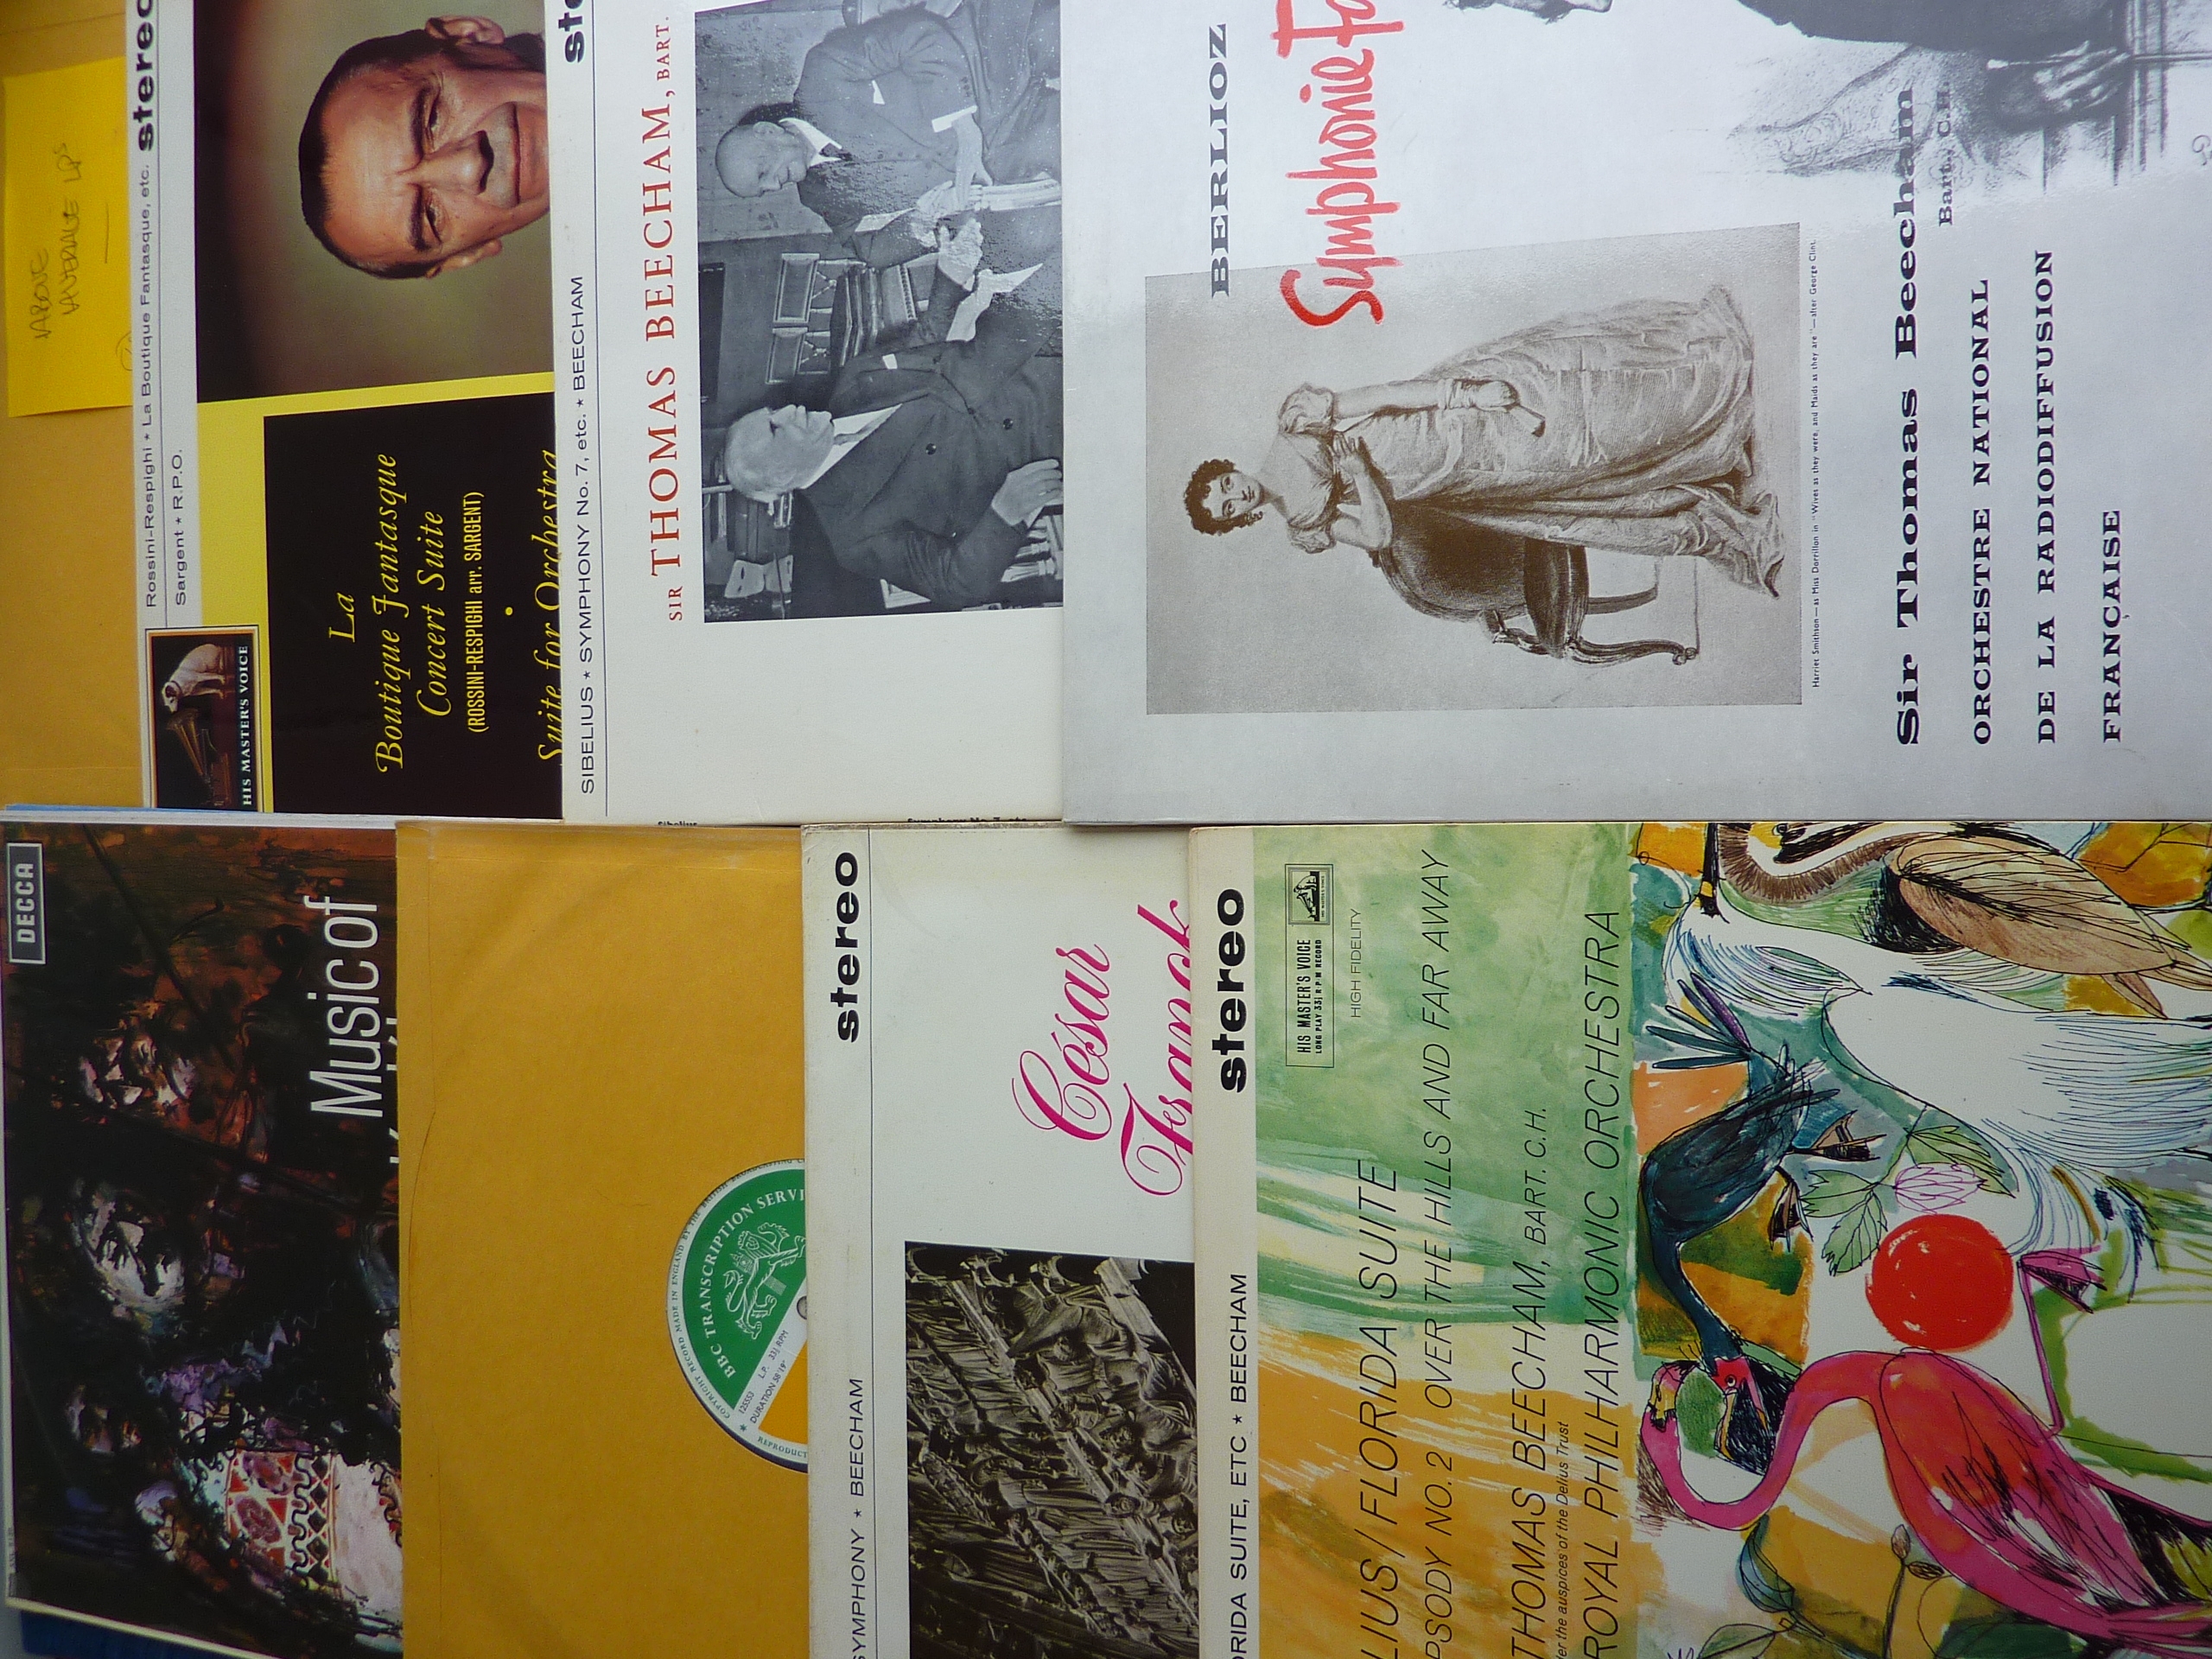 CLASSICAL RECORDS, QTY. STEREO LPs, EX SIR THOMAS BEECHAM PRIVATE COLLECTION